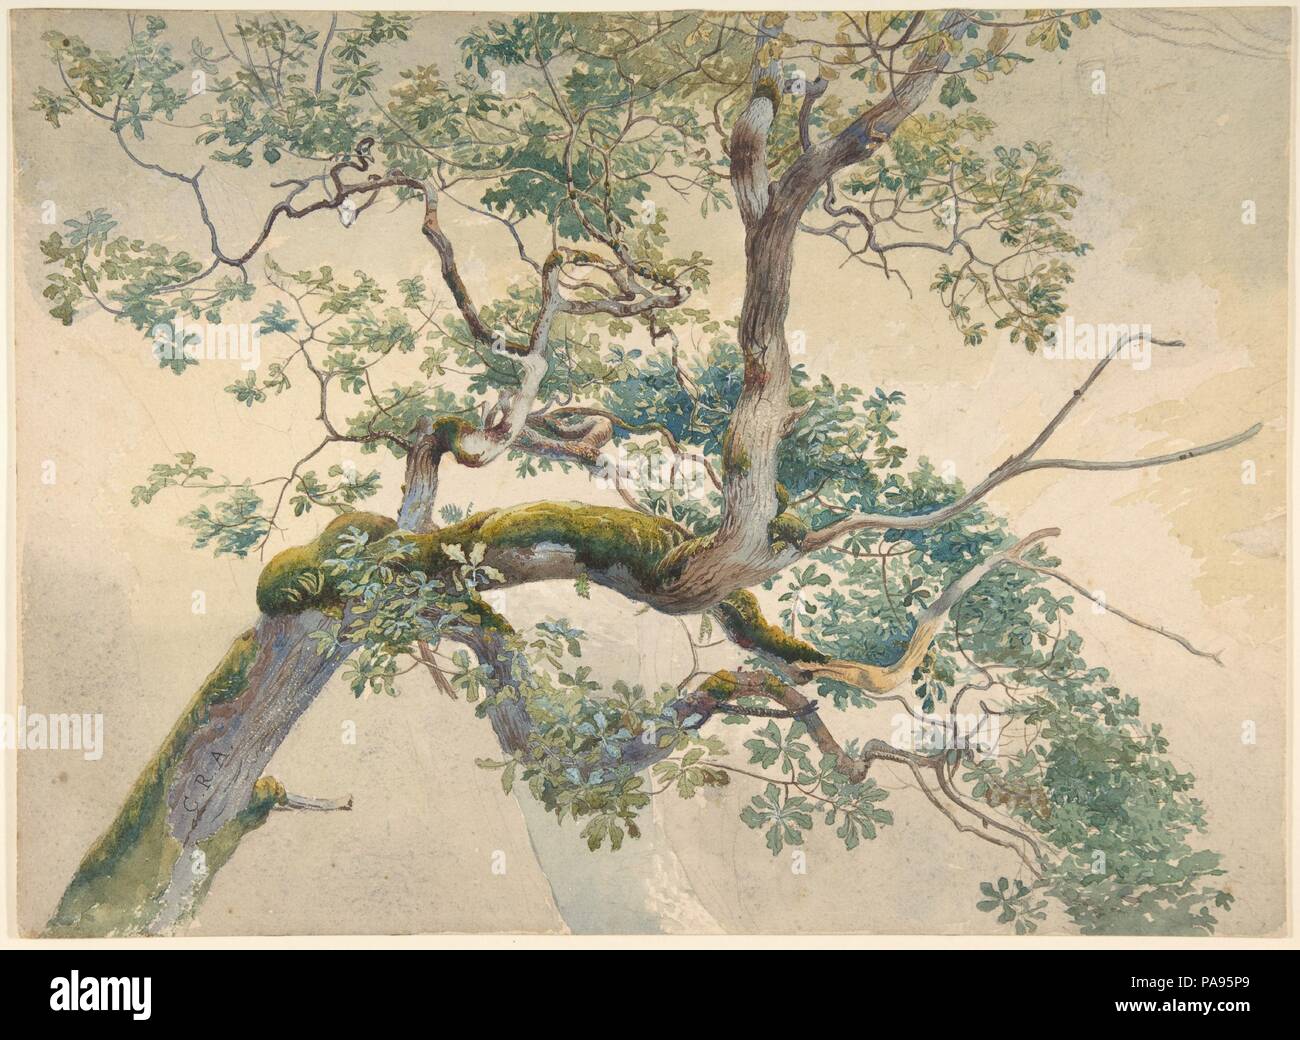 Tree Branches. Artist: Charles Reginald Aston (British, Birmingham 1832-1908 Birmingham). Dimensions: sheet: 9 1/2 x 13 in. (24.1 x 33 cm). Date: 1852-1908.  Aston came from Birmingham and trained as an architect before turning to landscape painting. He traveled in Britain and to Italy to seek subjects exhibited at the Royal Academy and Royal Institute of Painters in Watercolours in London, and joined the latter in 1882. In this study, closely observed bark, moss and foliage convey a reverence for nature which, together with the artful placement of the branches, suggests an admiration for John Stock Photo